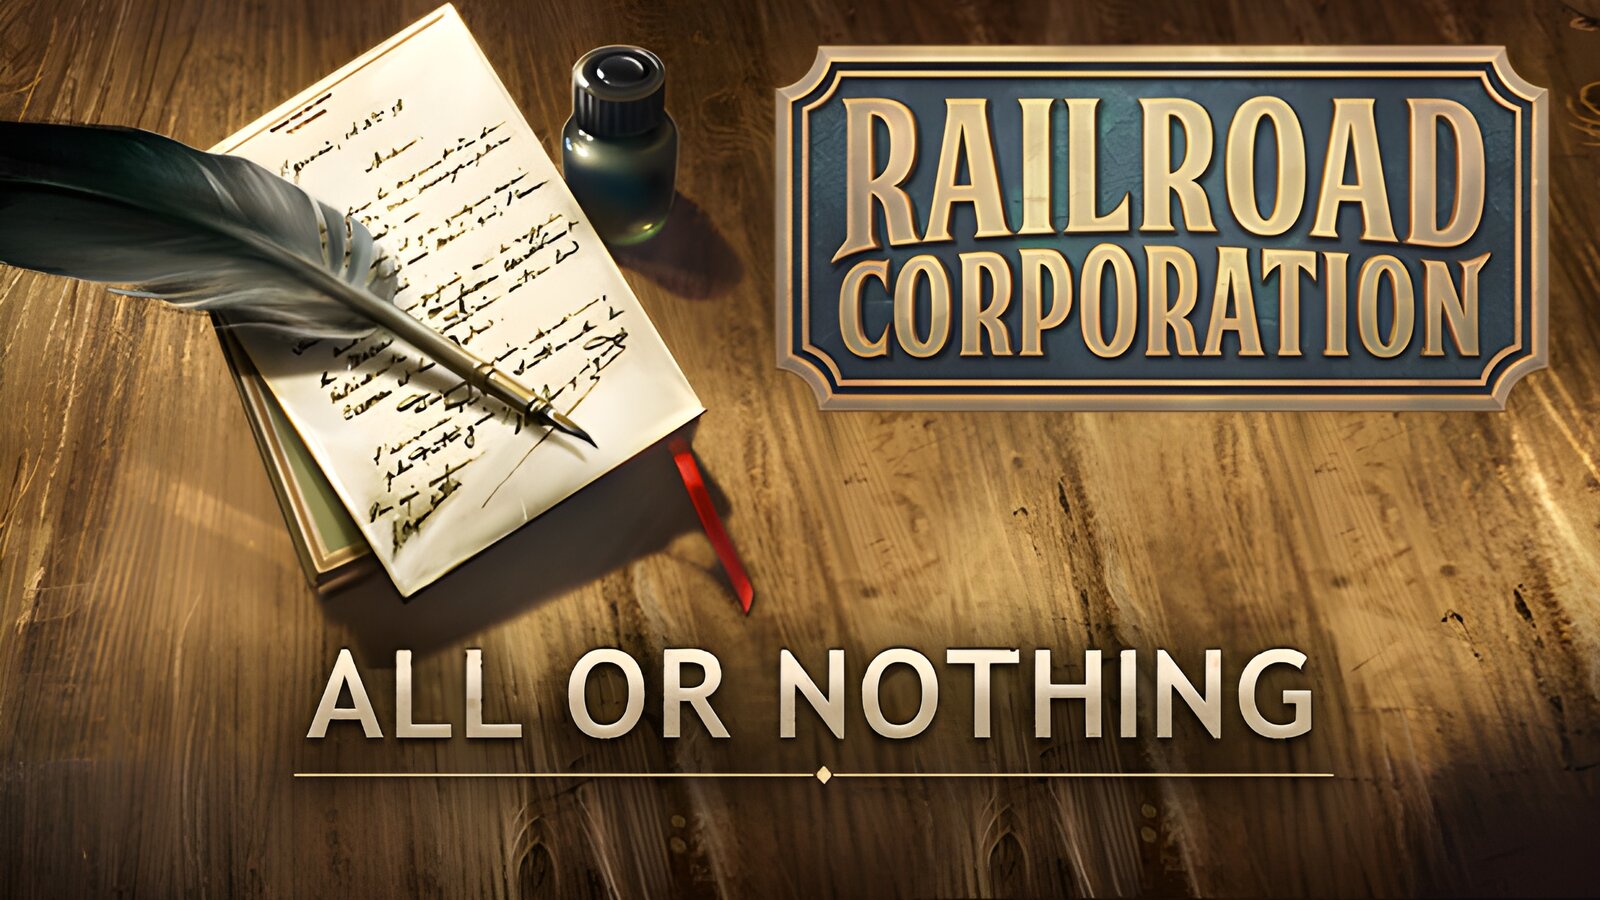 Railroad Corporation - All or Nothing